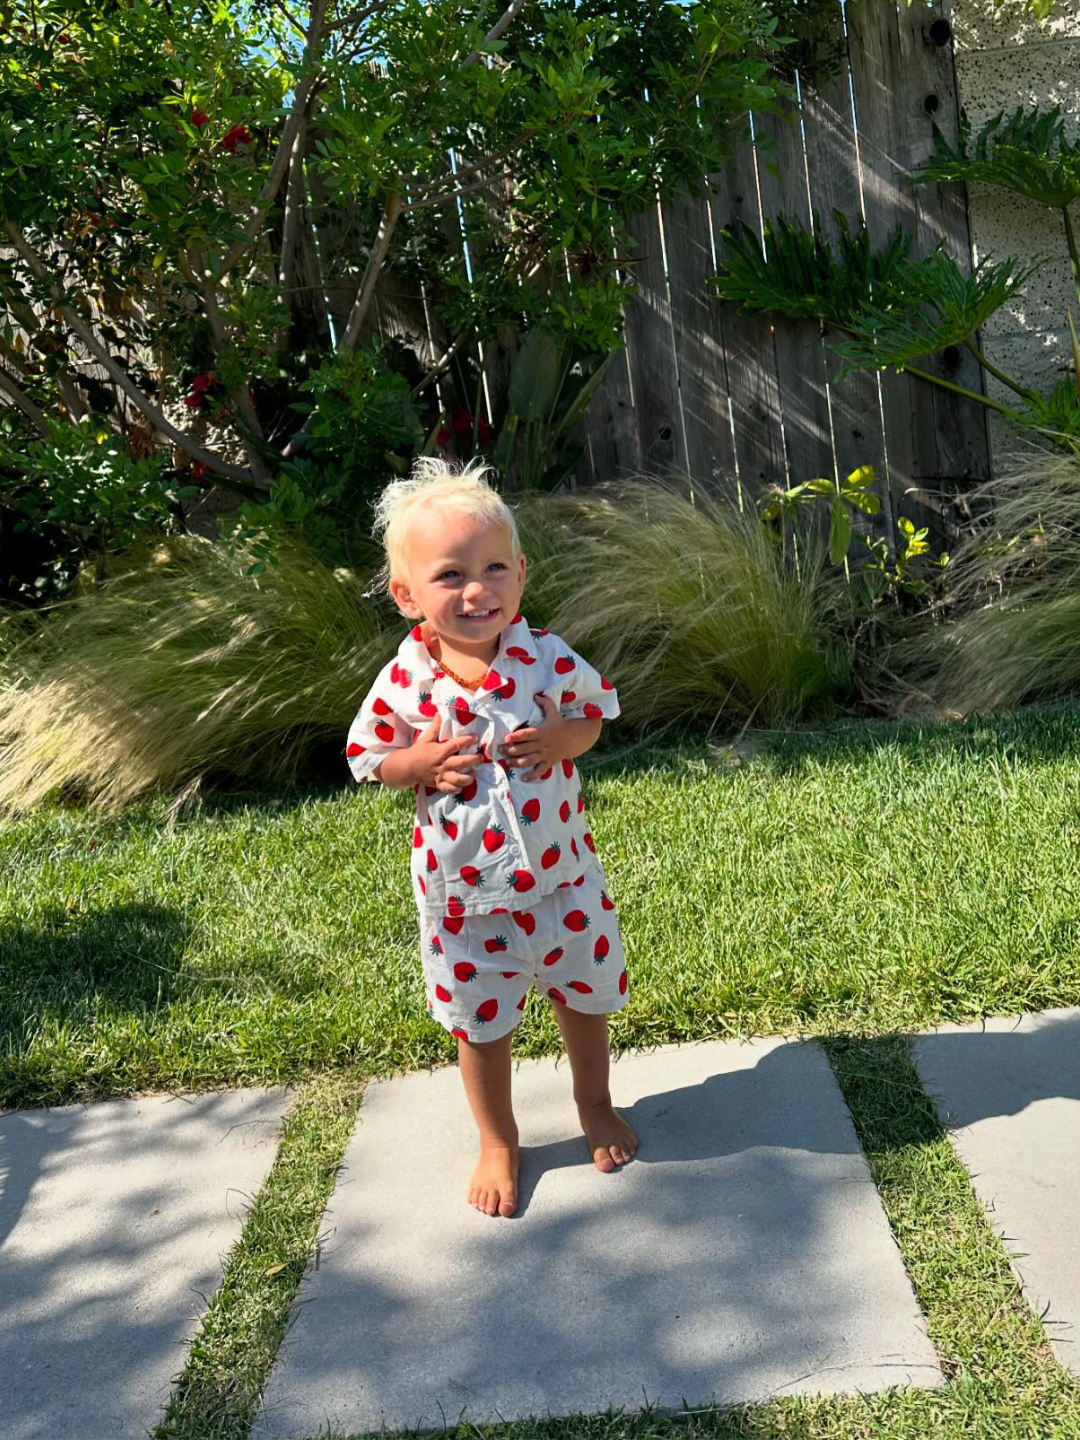 A toddler wearing the Berry Season short set in white cotton patterned with red strawberries. They are standing on a paved path in a green grassy garden in sunlight. They are smiling and have blond hair.